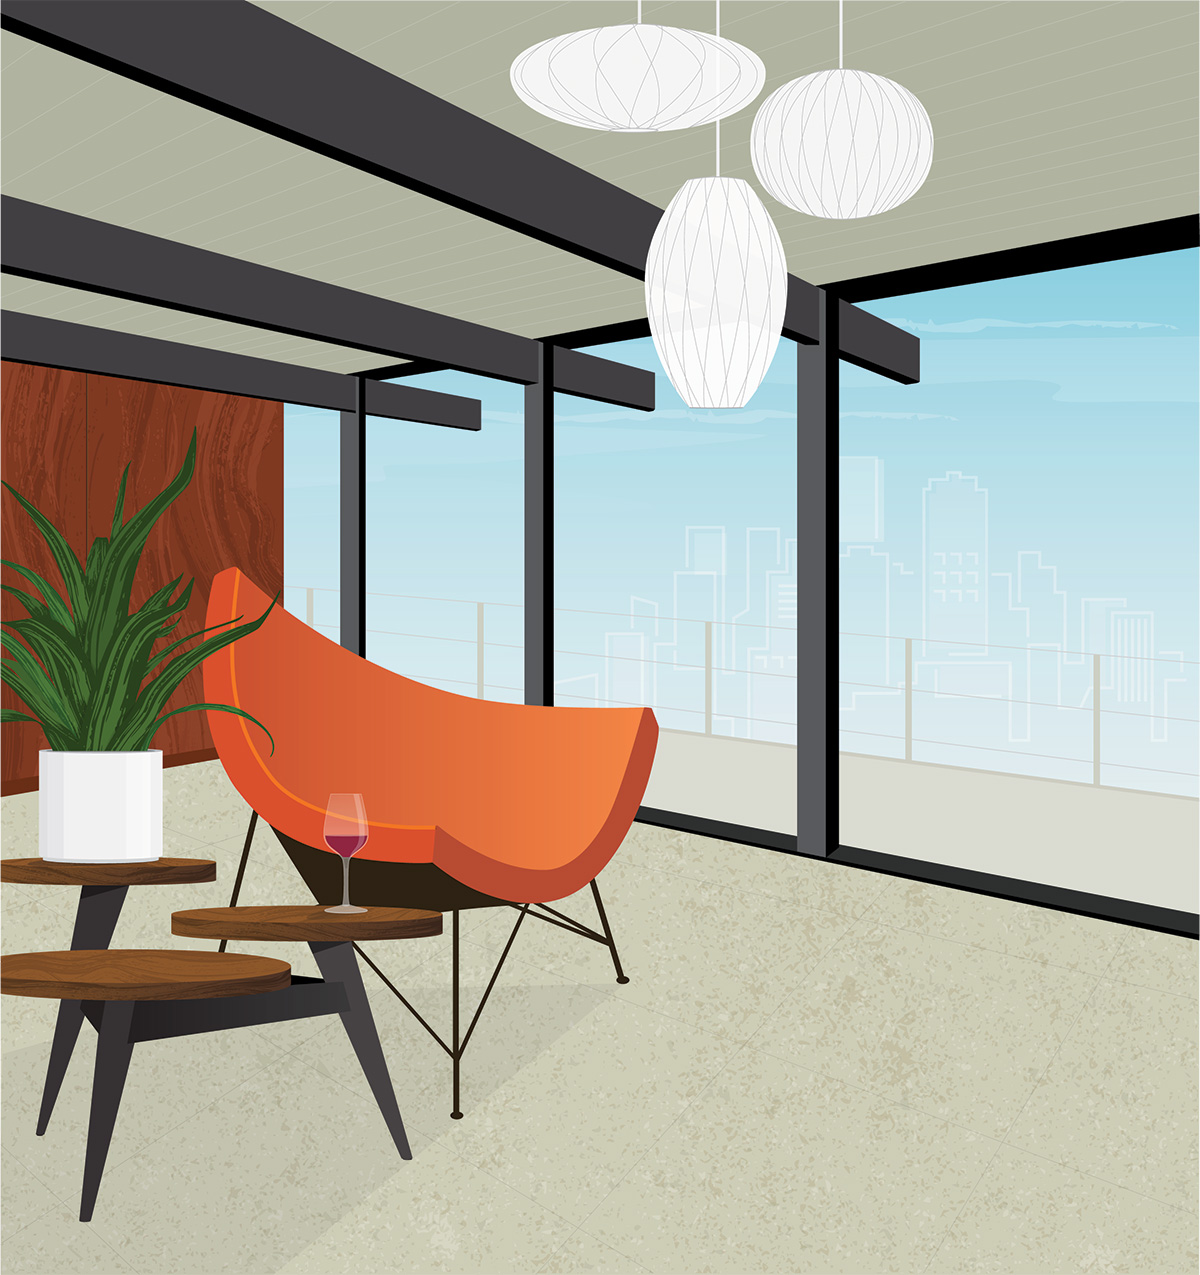 mid-century modern illustration with chair and pendant lights